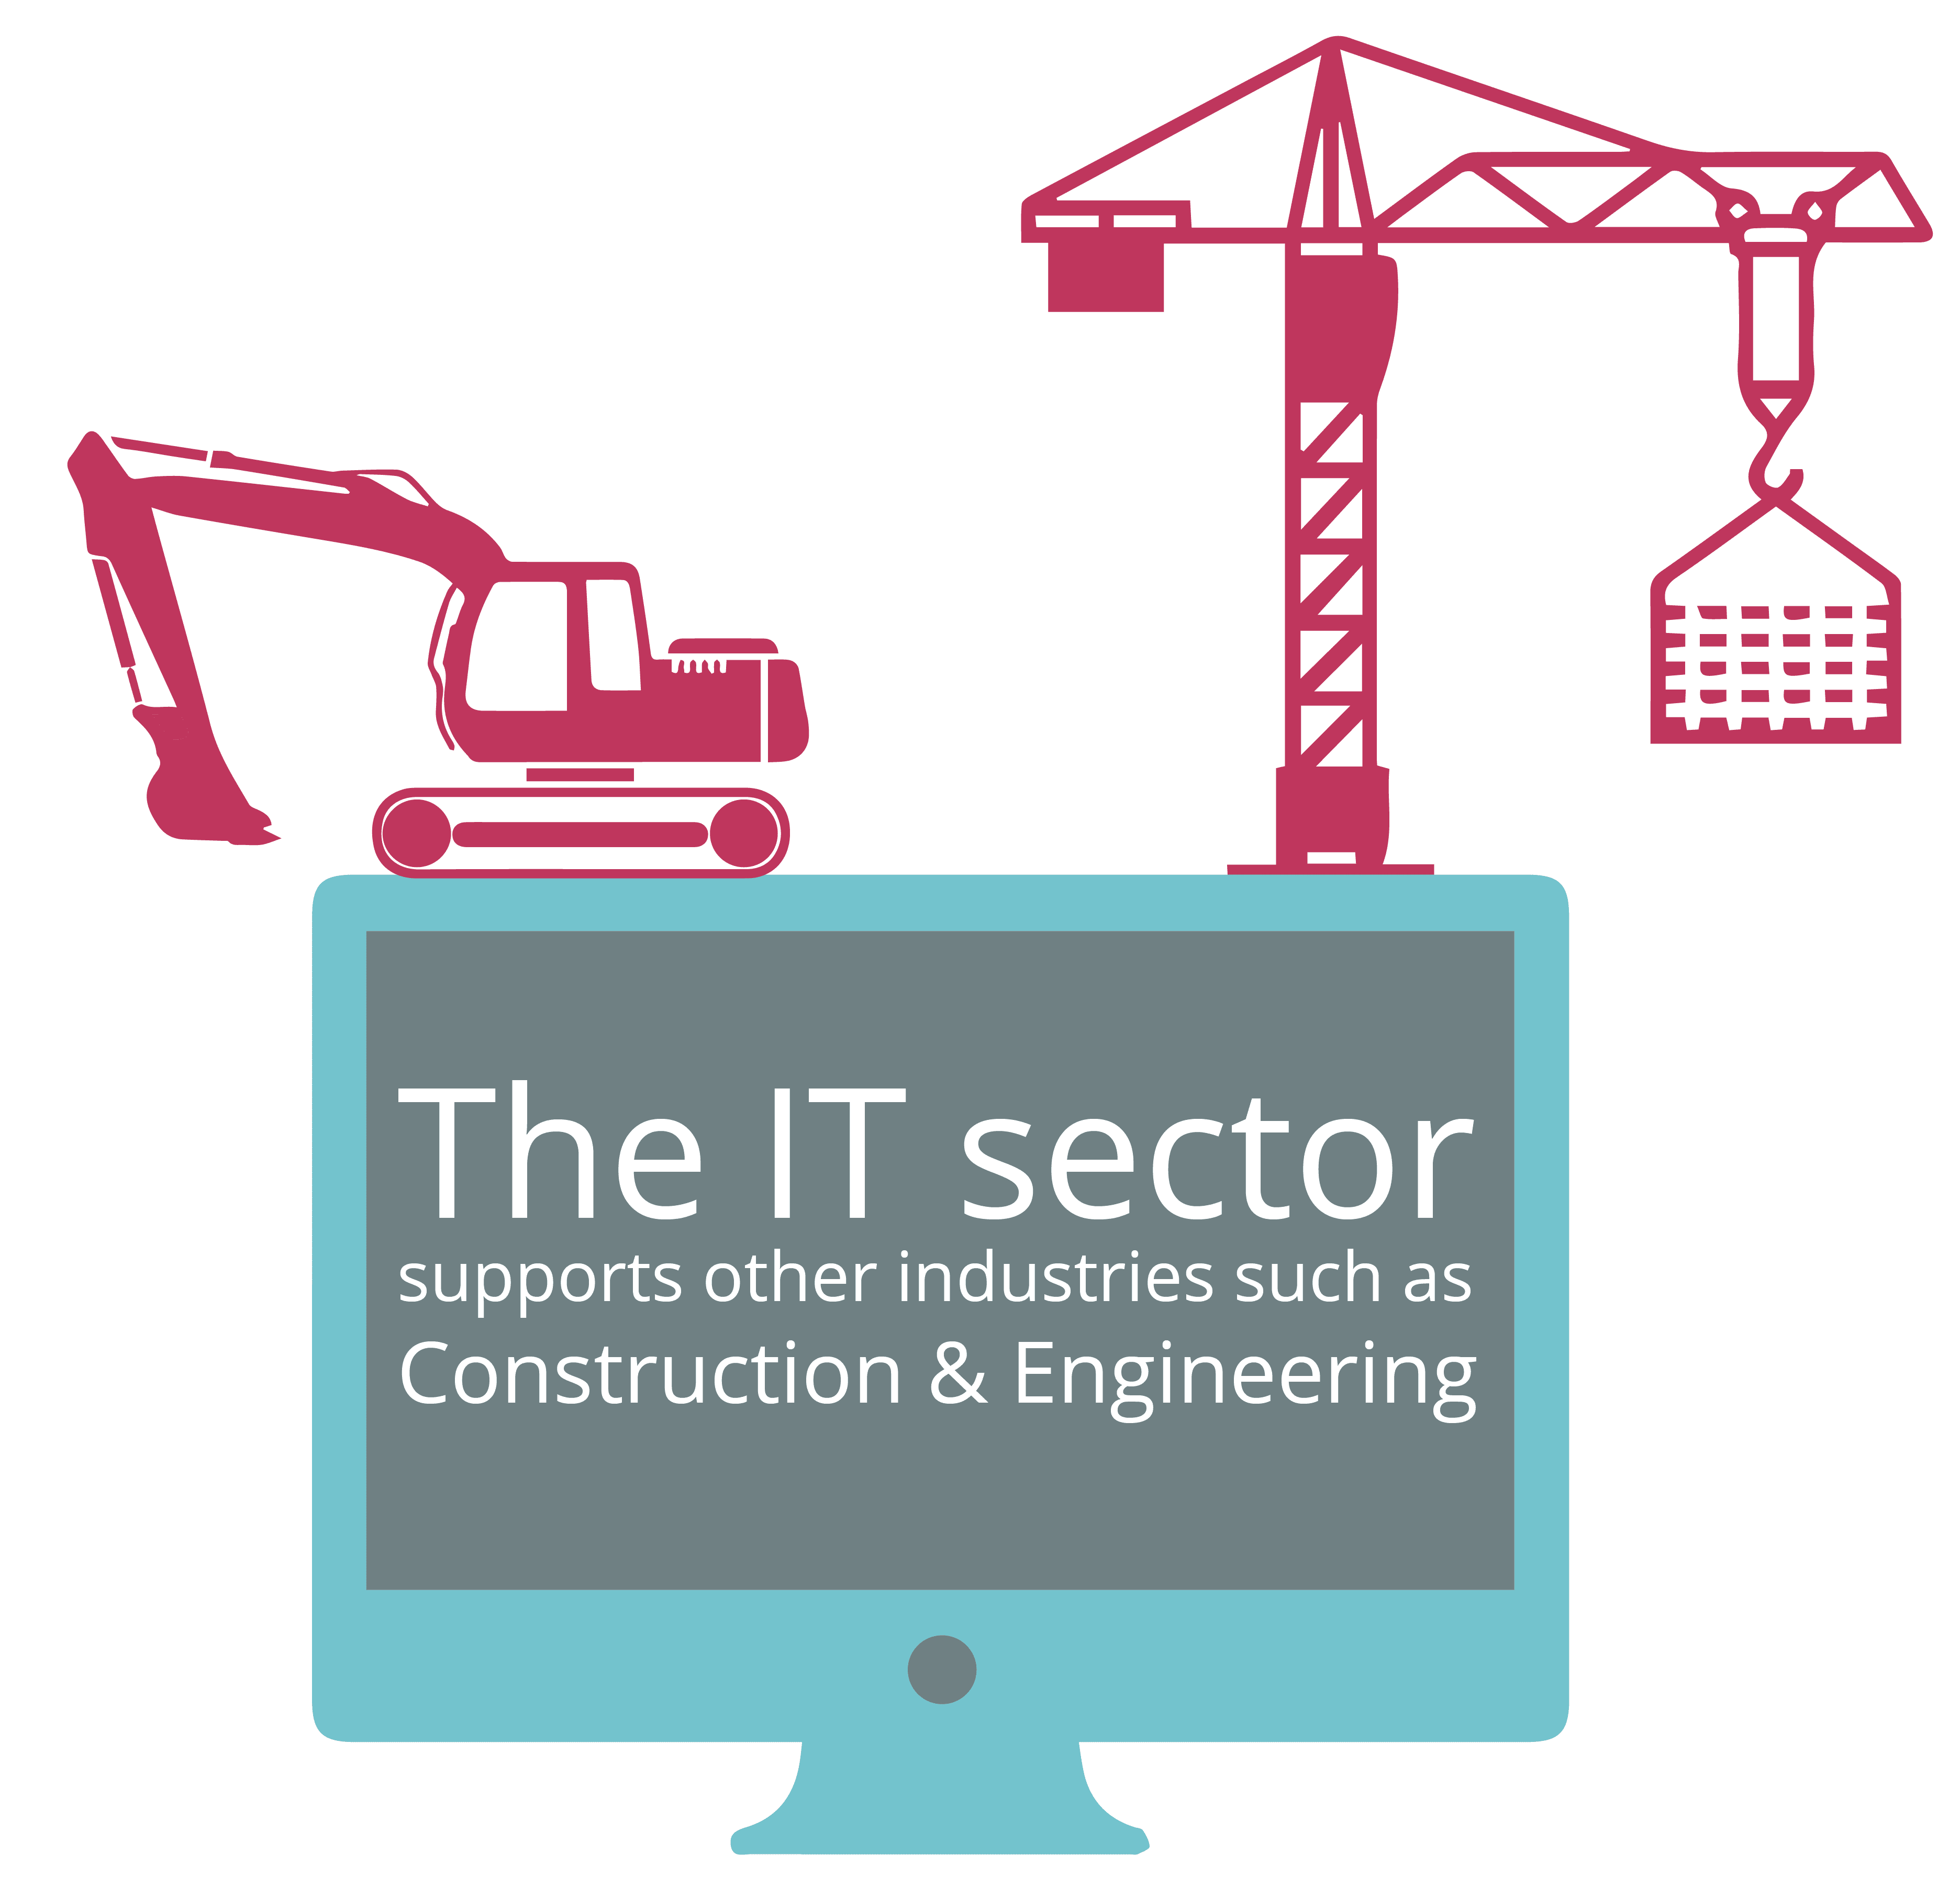 The IT sector supports other industries such as Construction and Engineering